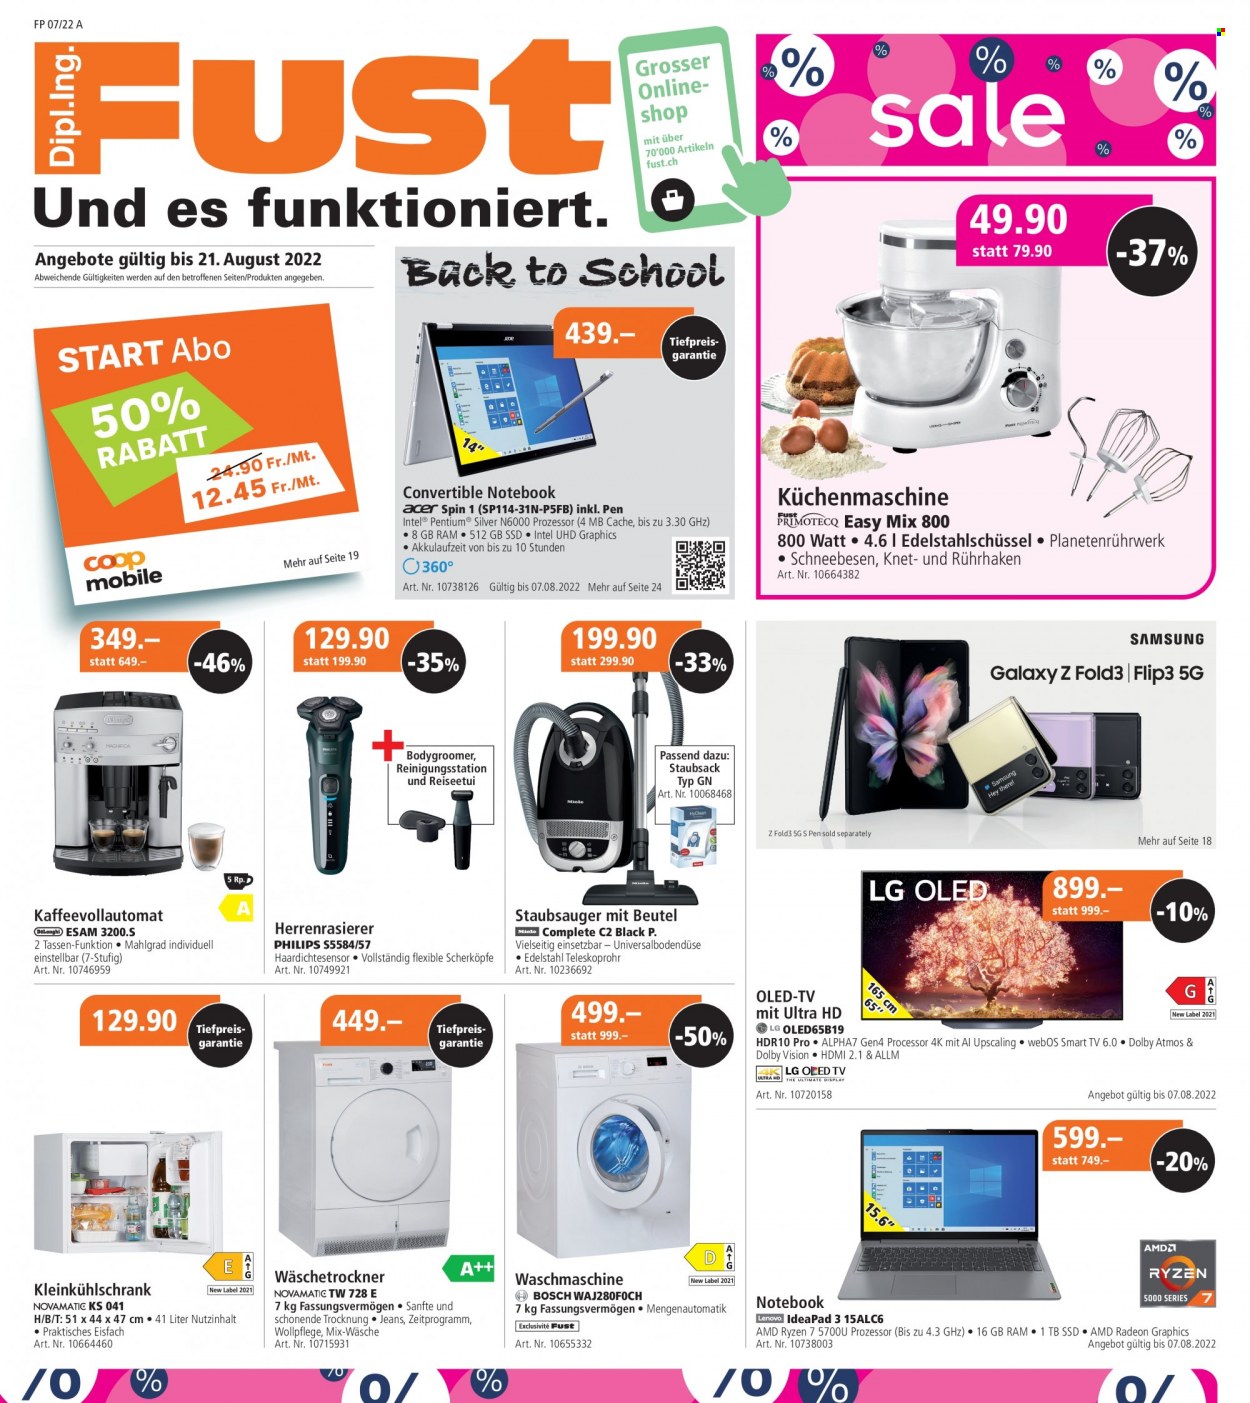 Catalogue Fust - 25.7.2022 - 21.8.2022. Page 1.